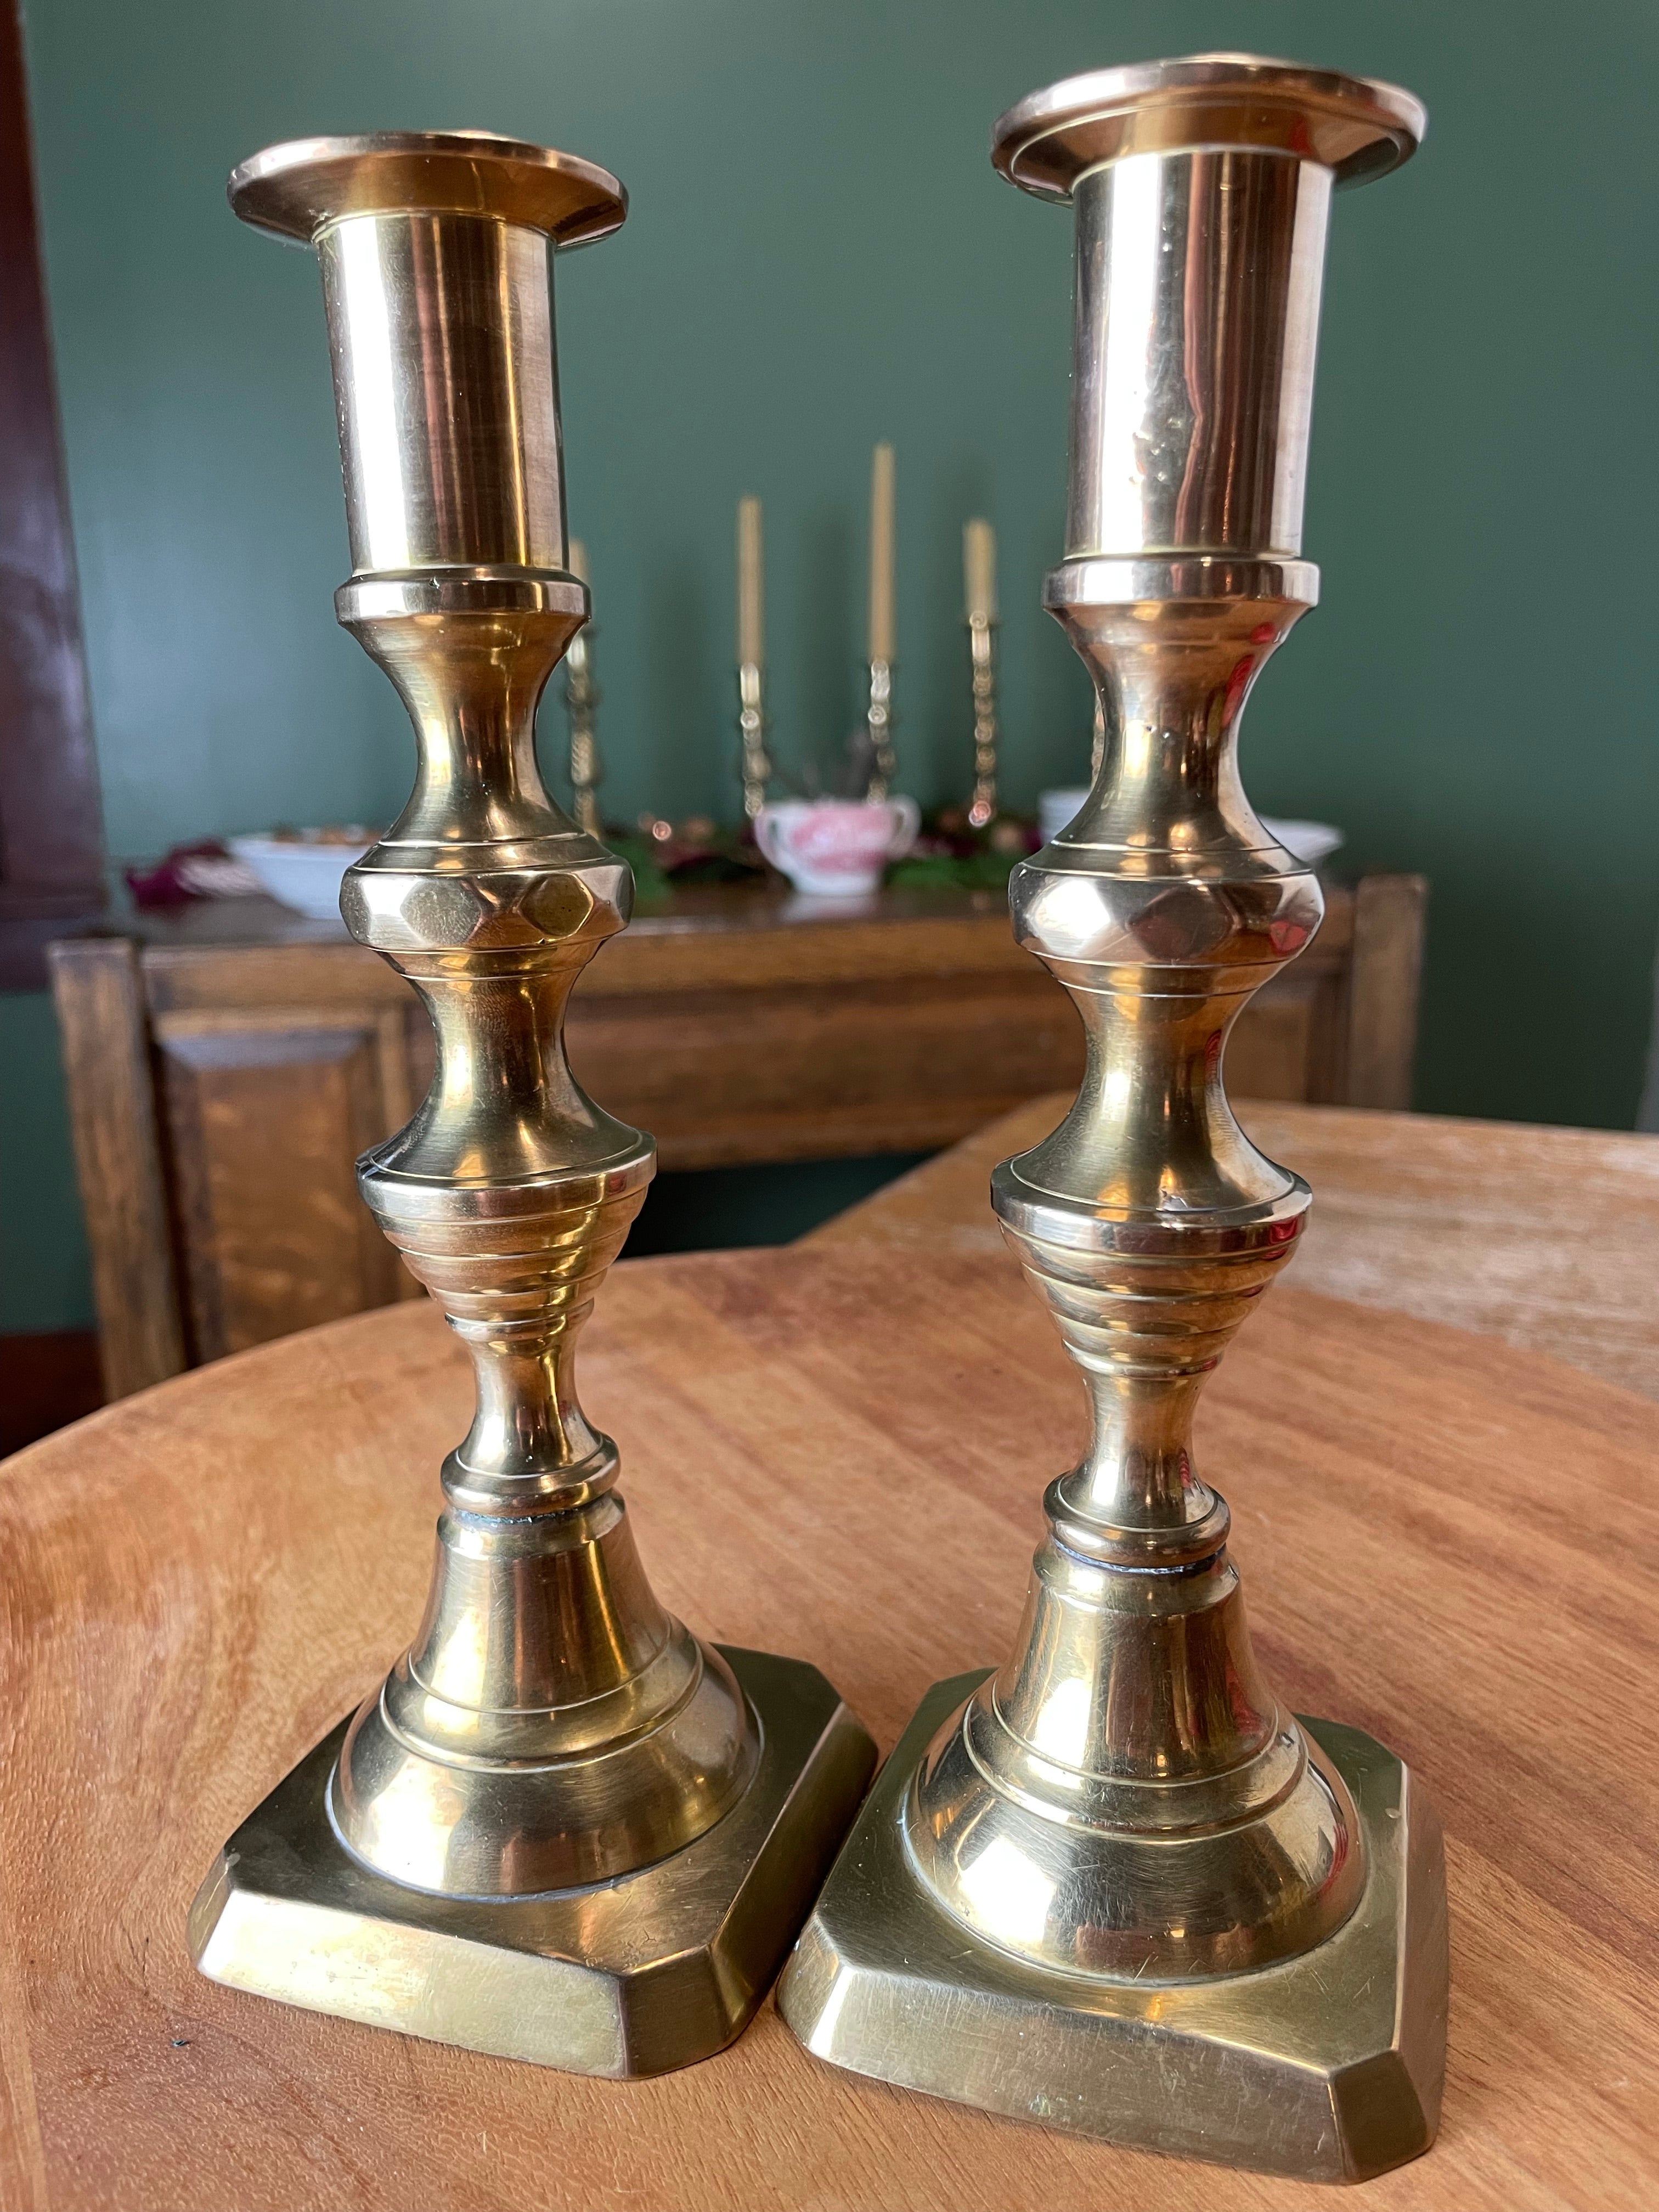 English Brass Candlestick With Push up Rods , Antique 19th Century